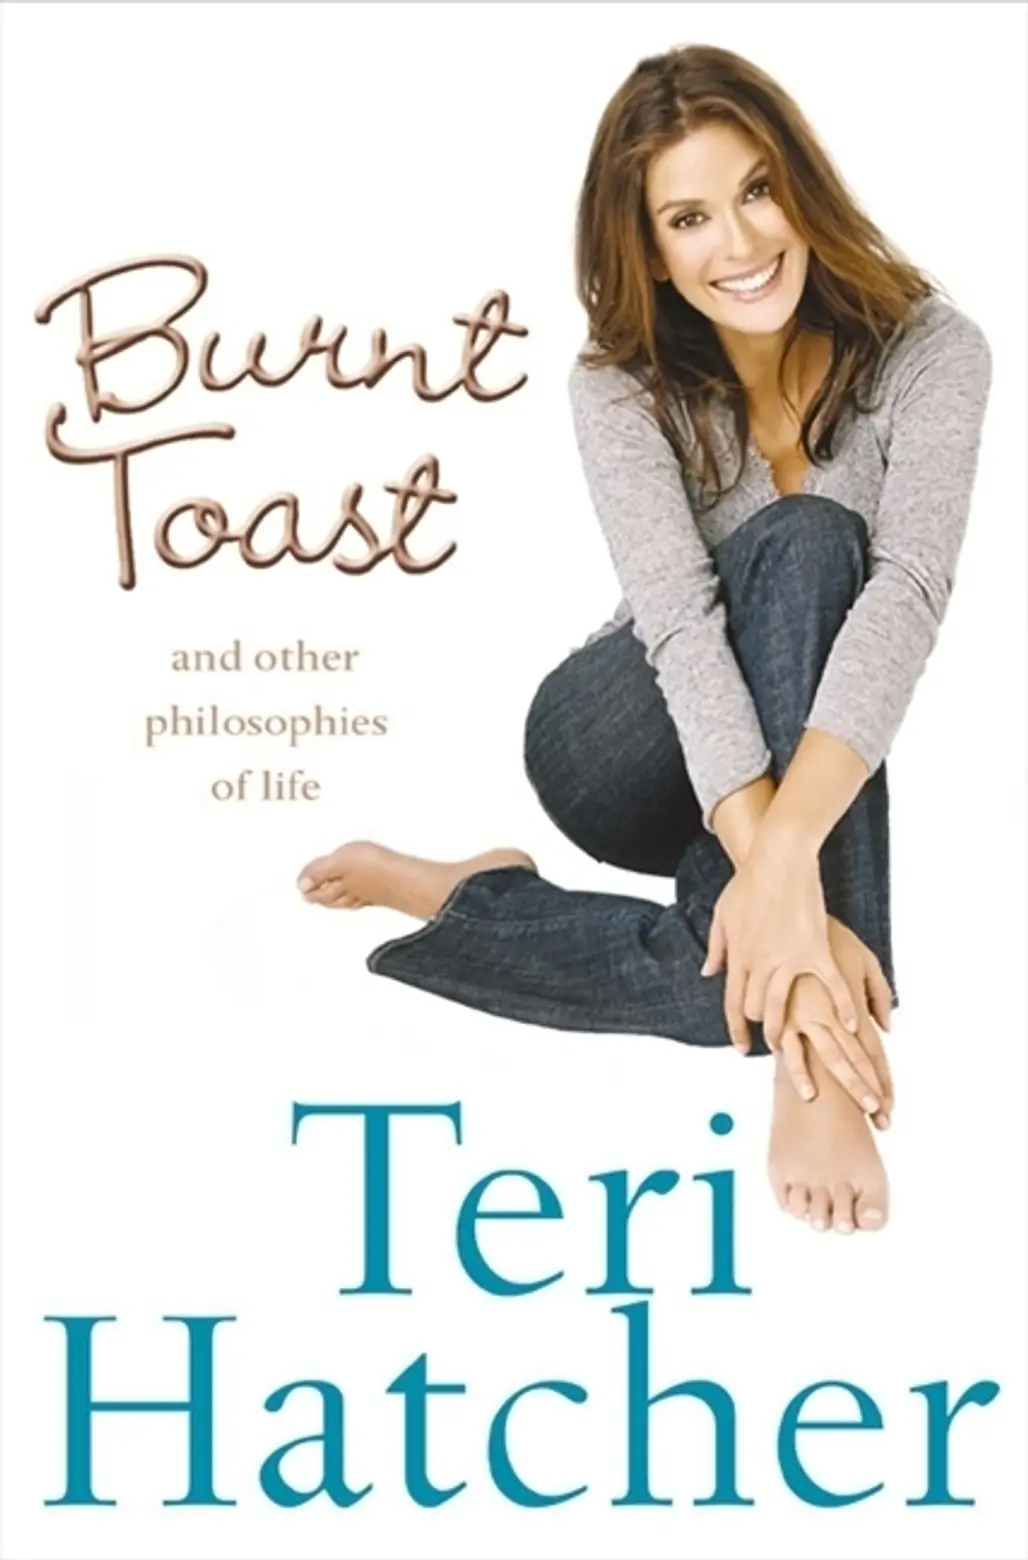 Teri Hatcher’s ‘Burnt Toast and Other Philosophies of Life’